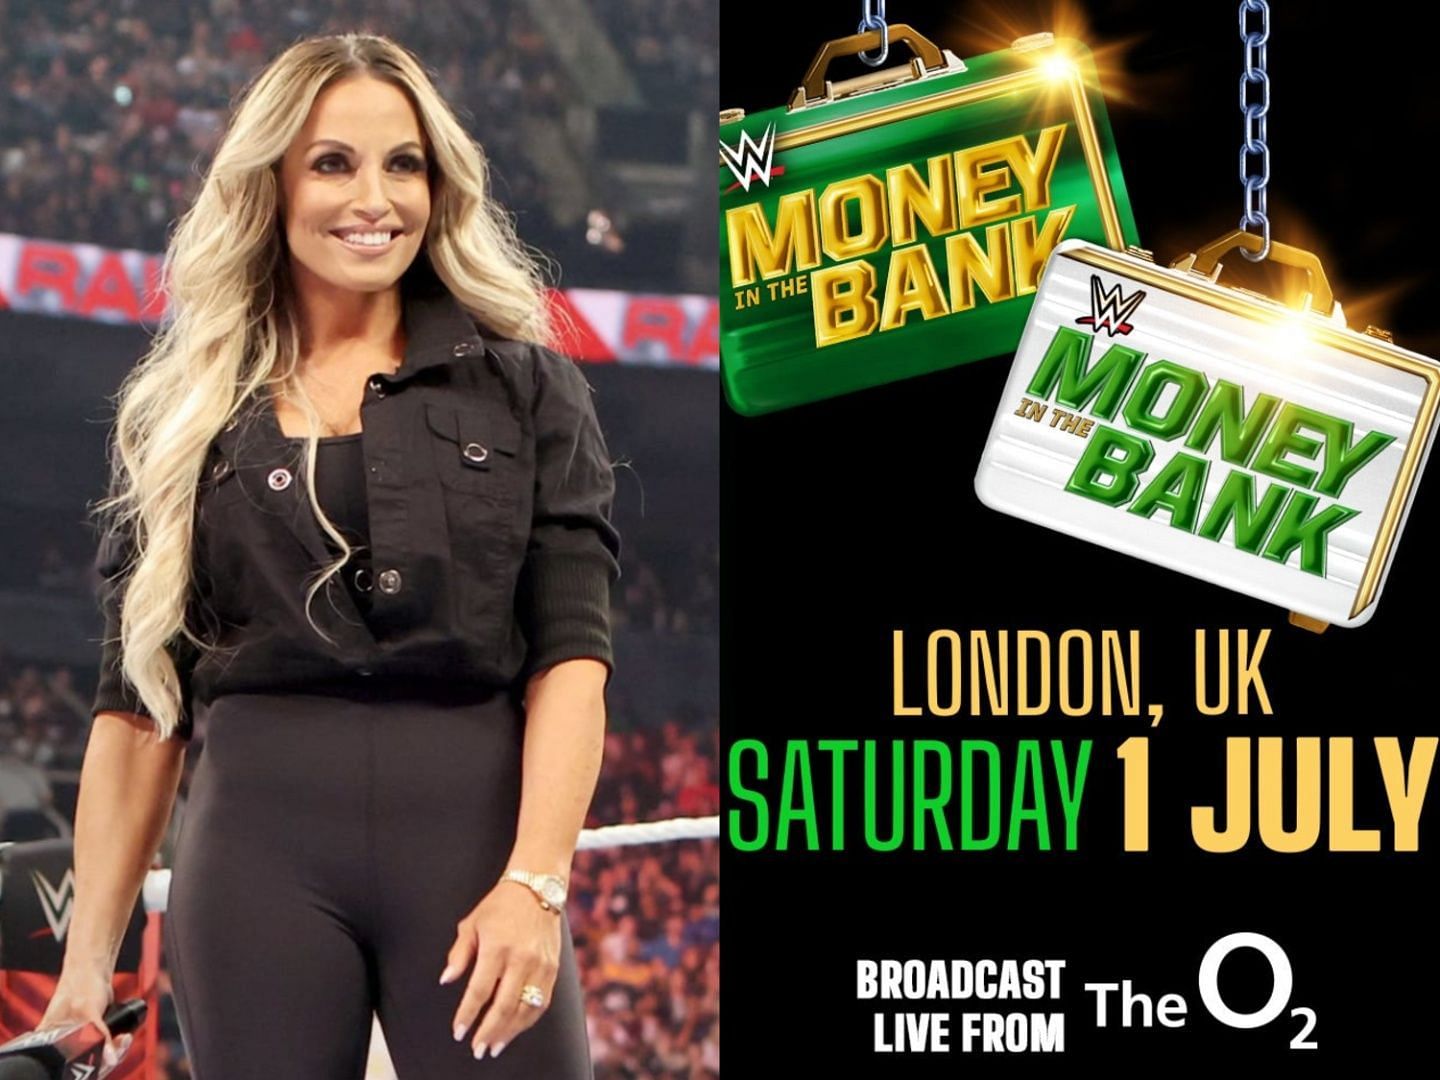 Will Trish Stratus be at Money in the Bank in London?